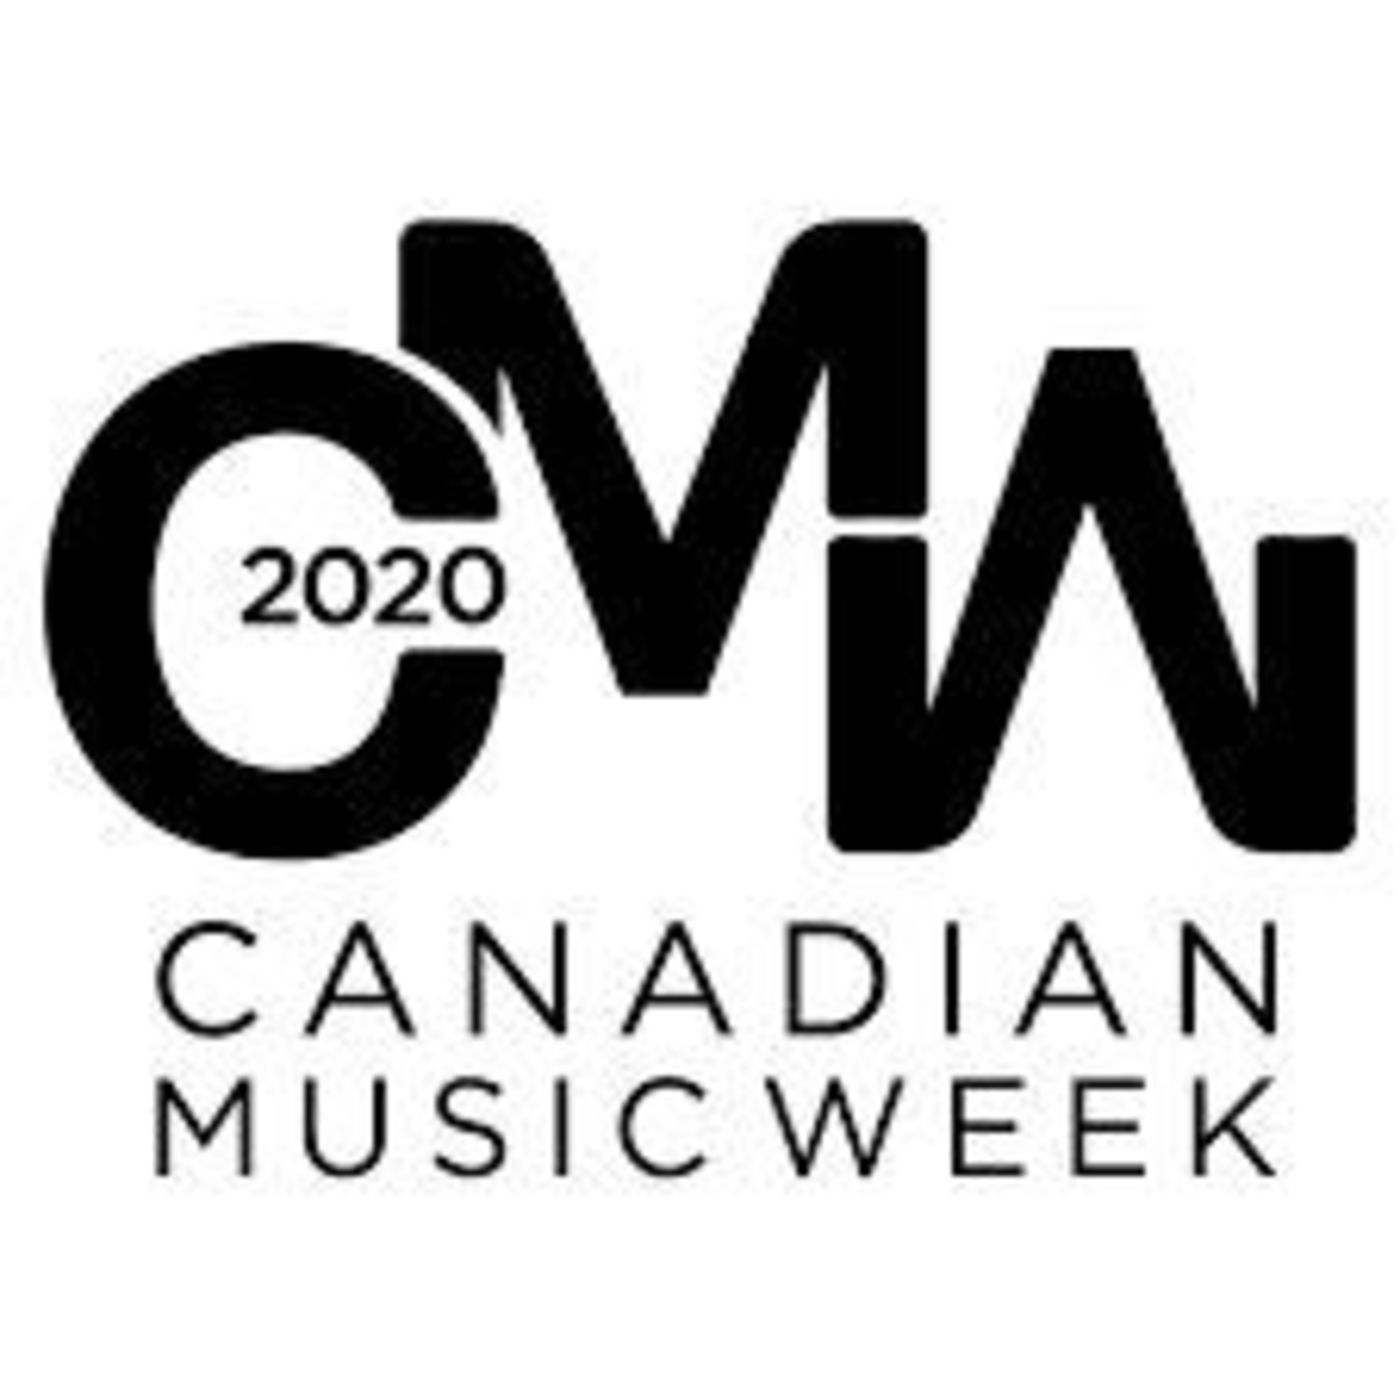 Ross Davies previews the expanded Canadian Music Week 2020 Radio Active Summit